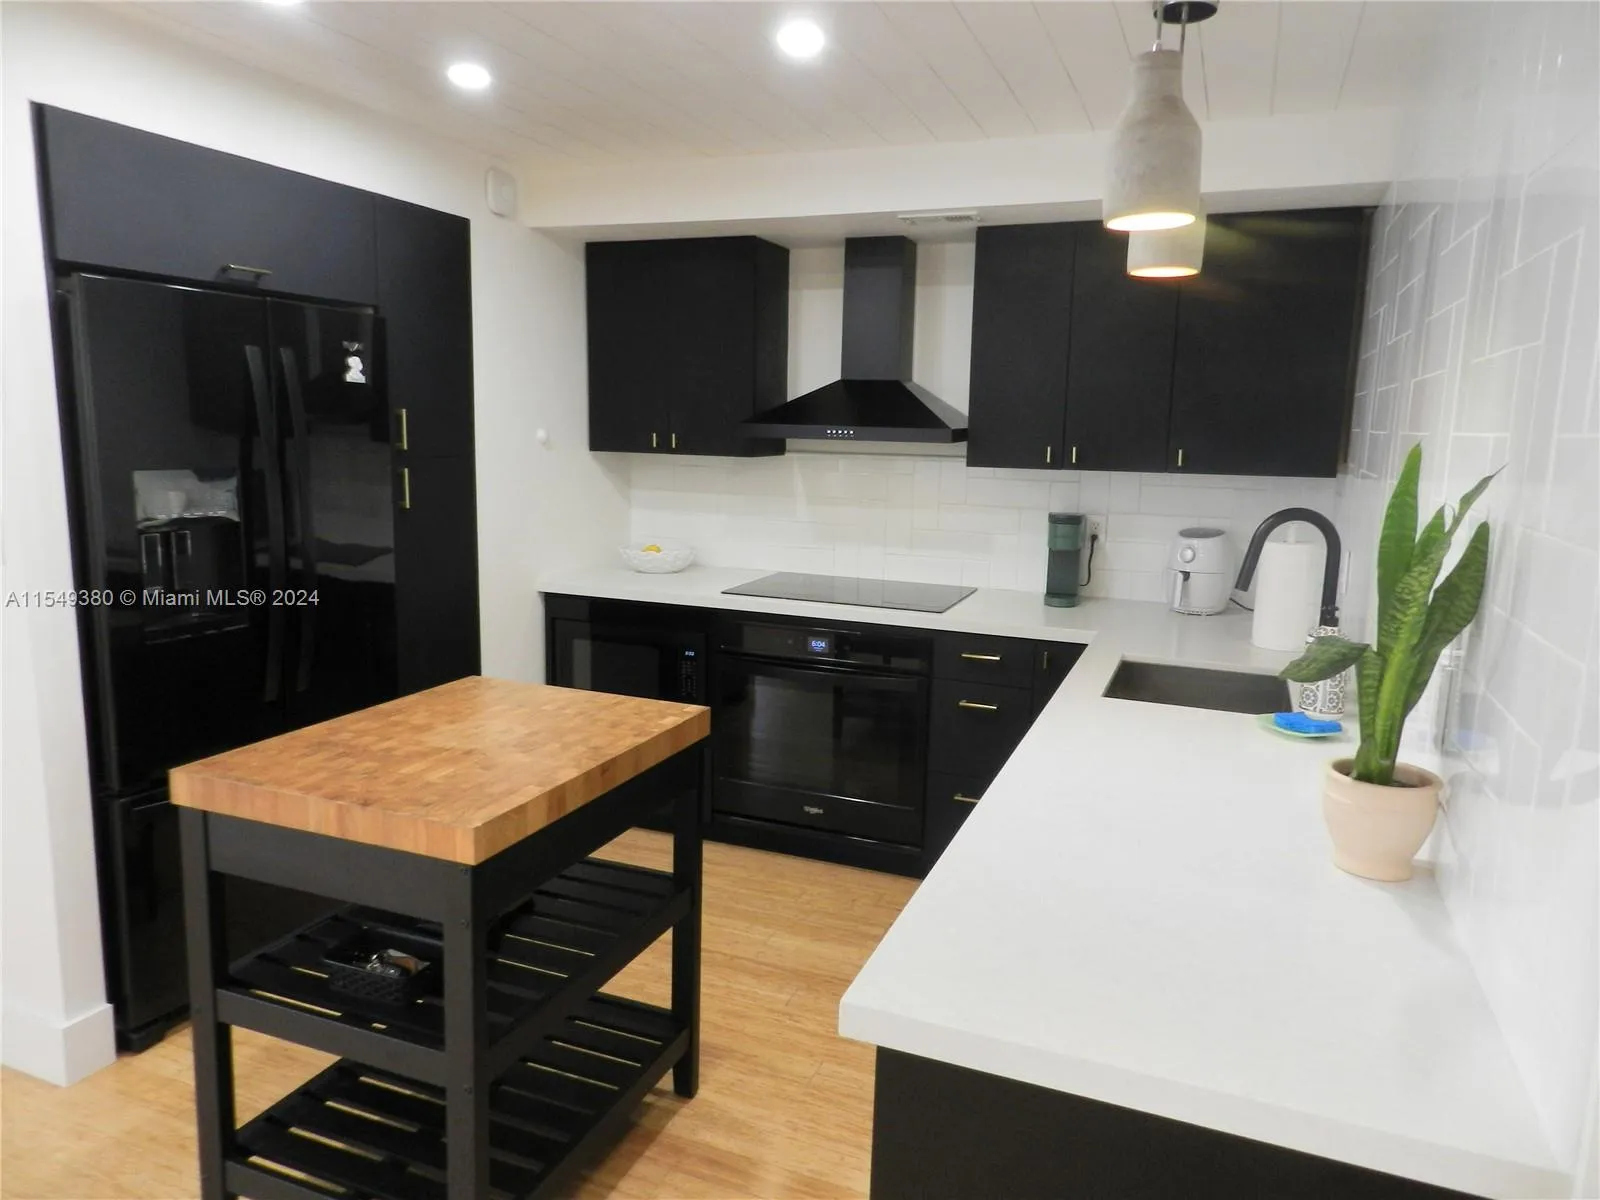 Gorgeous fully remodeled kitchen with quartz counters and upgraded appliances